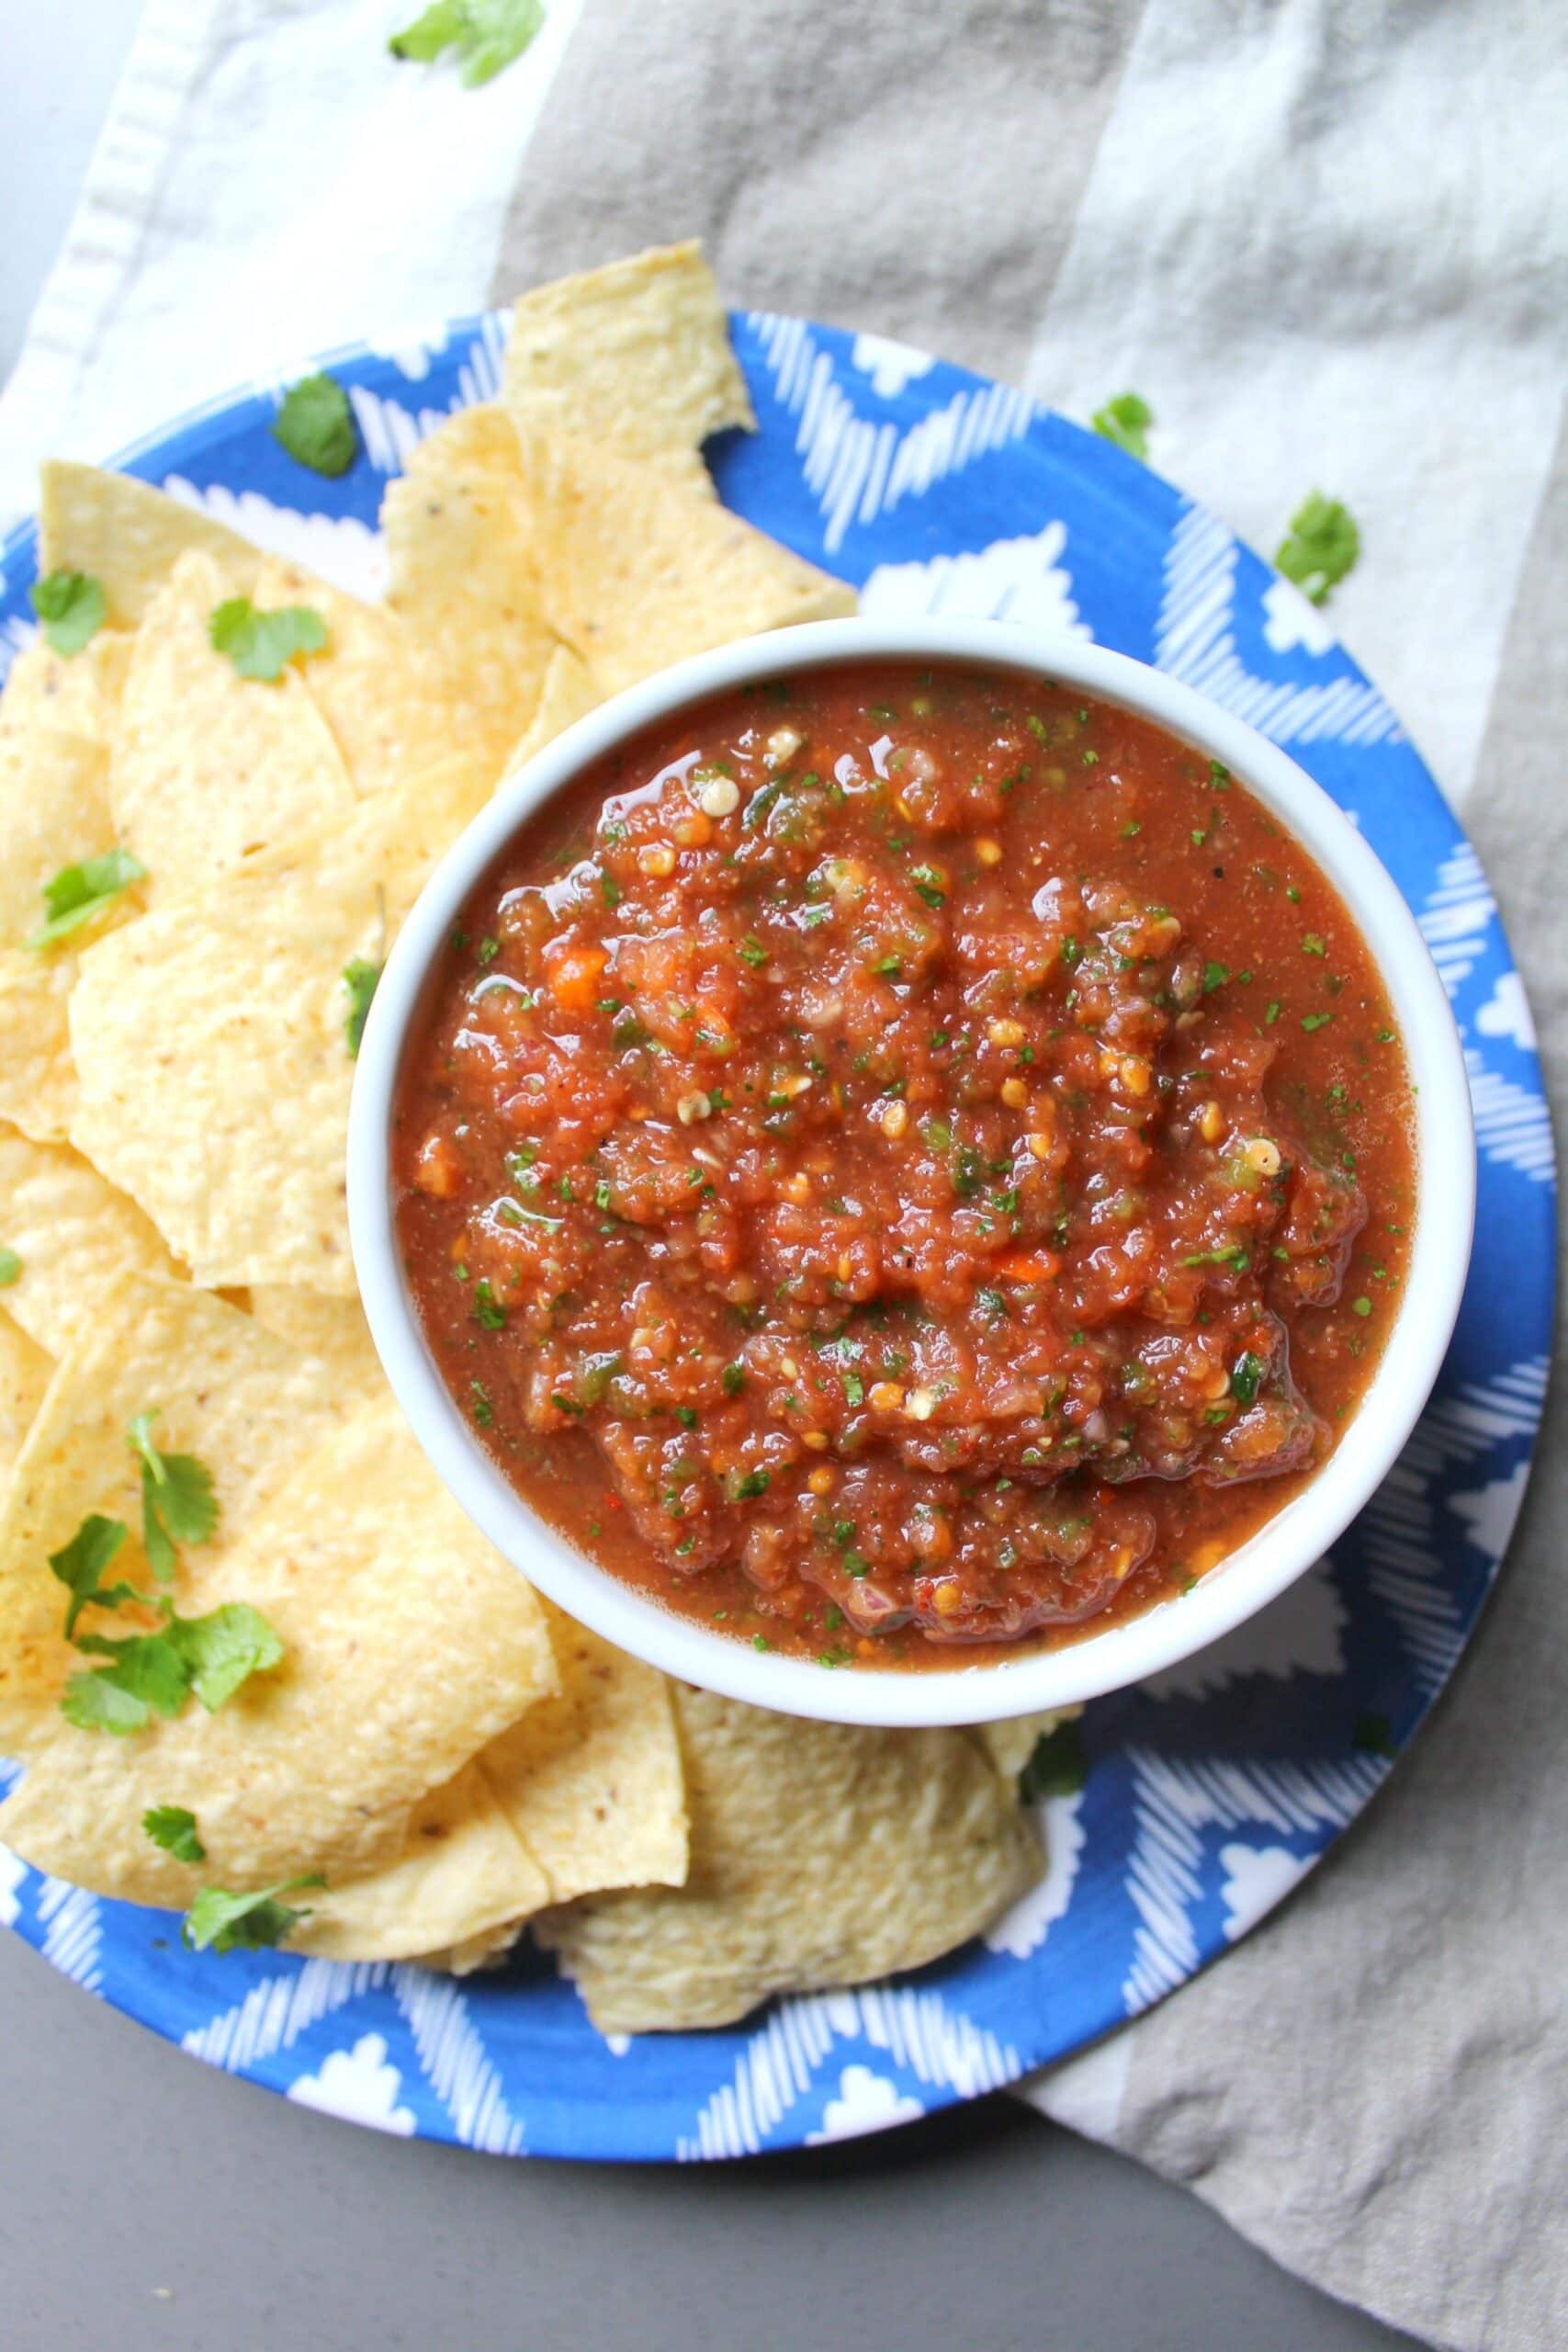 Spicy habanero salsa with chips on the side